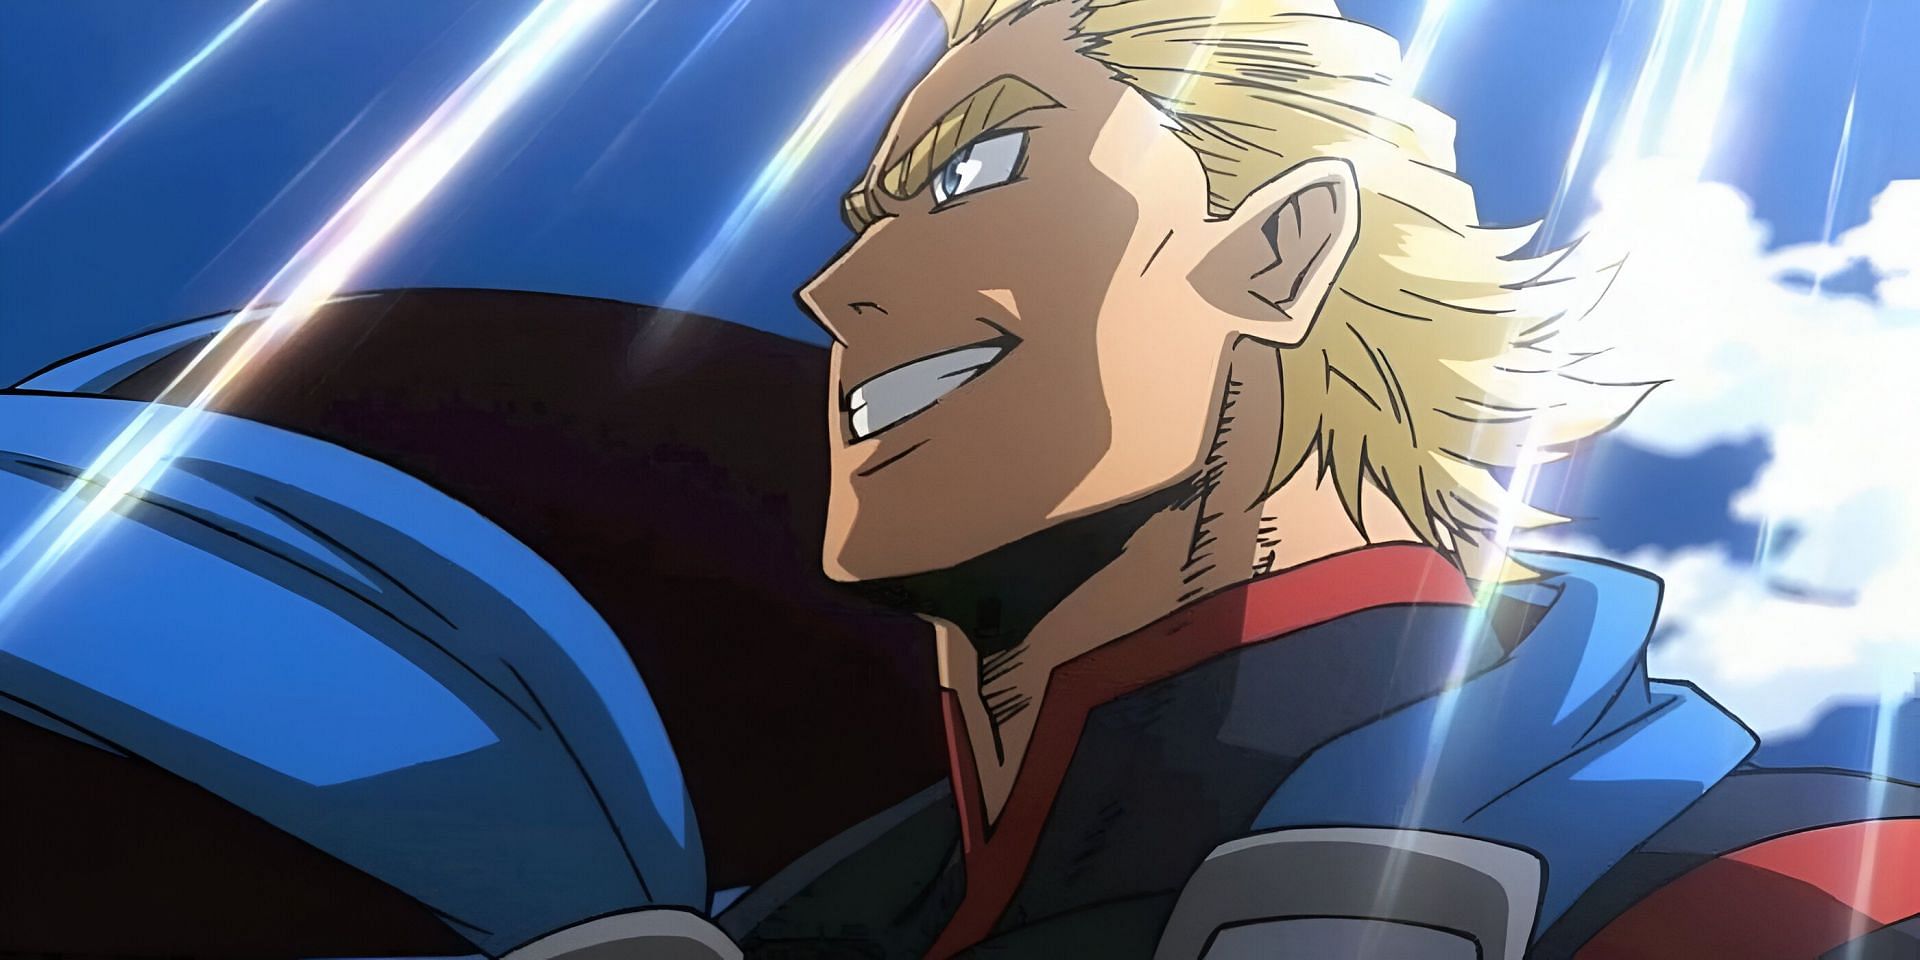 All Might as seen in the anime (Image via BONES)